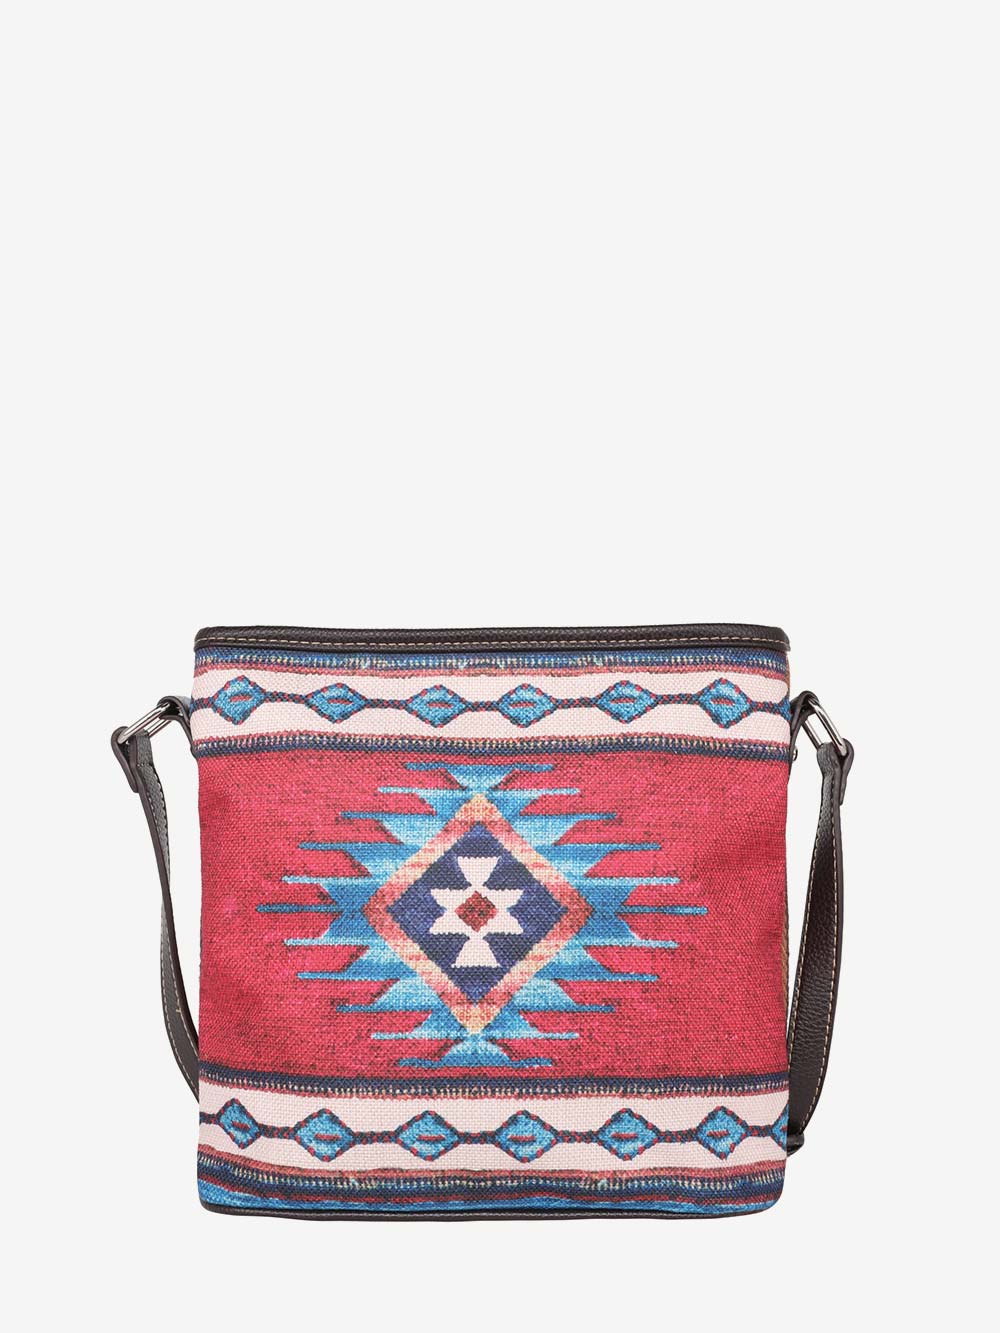 Montana West Aztec Canvas Tote Collection - Montana West World